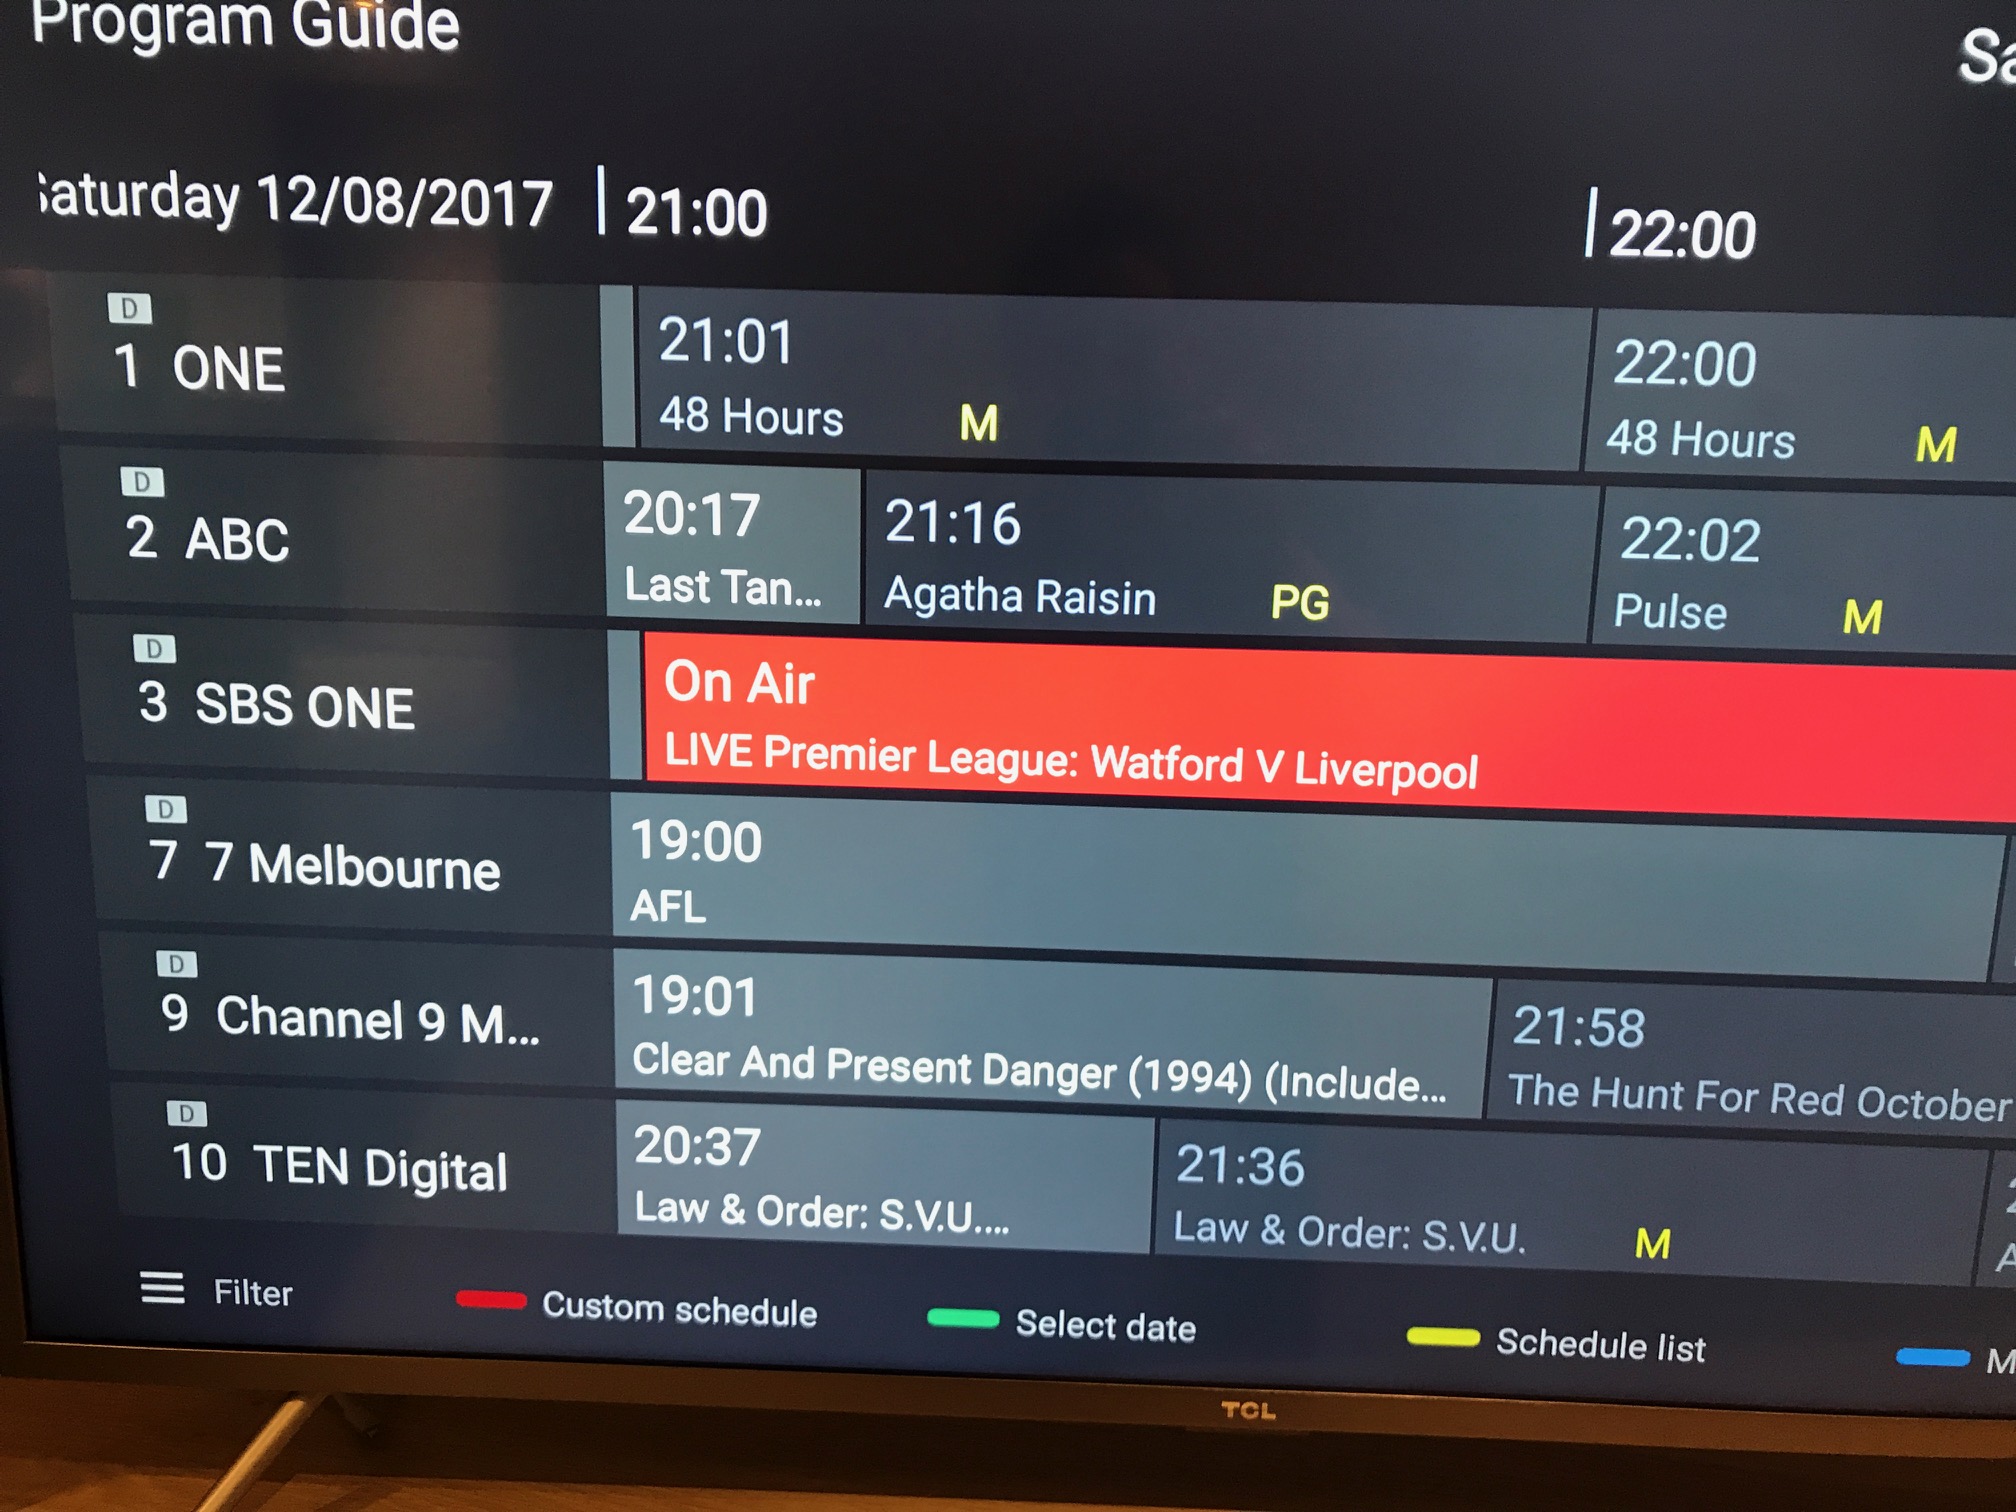 How to watch EPL in Australia live